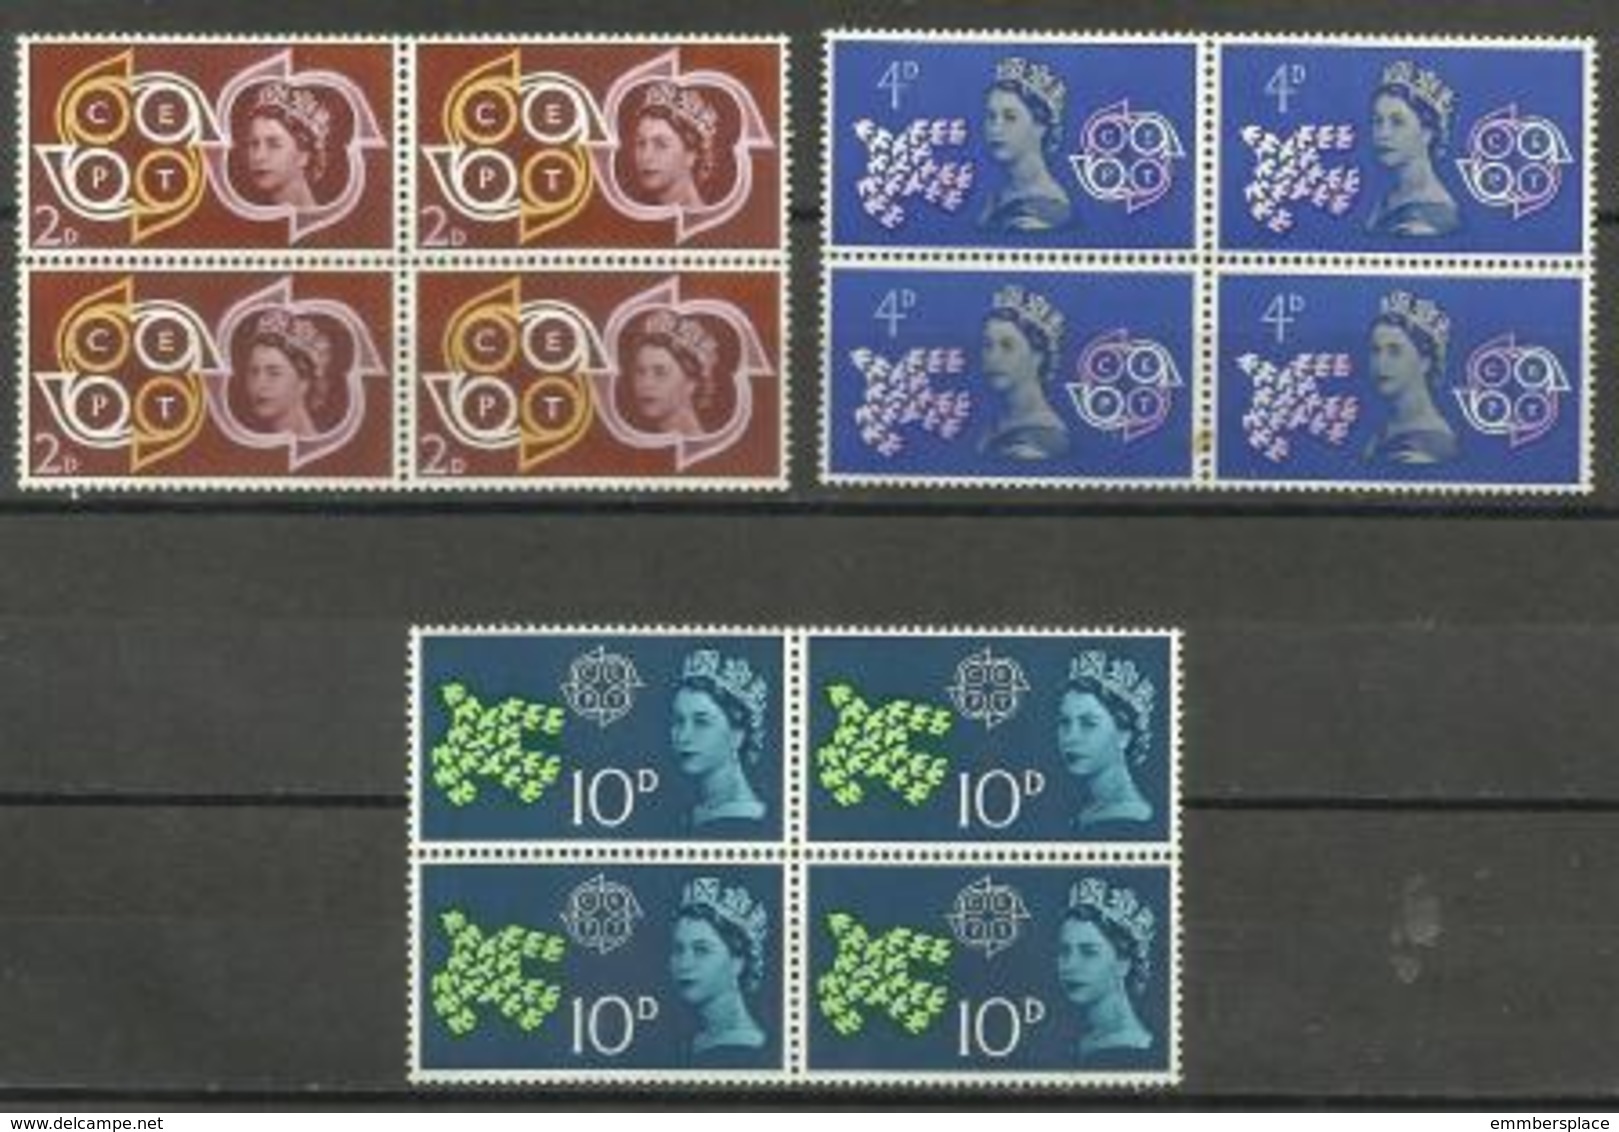 GB - 1961 EUROPA SET IN BLOCKS OF 4 MNH ** SG 636-8  Sc 382-4 - Unused Stamps